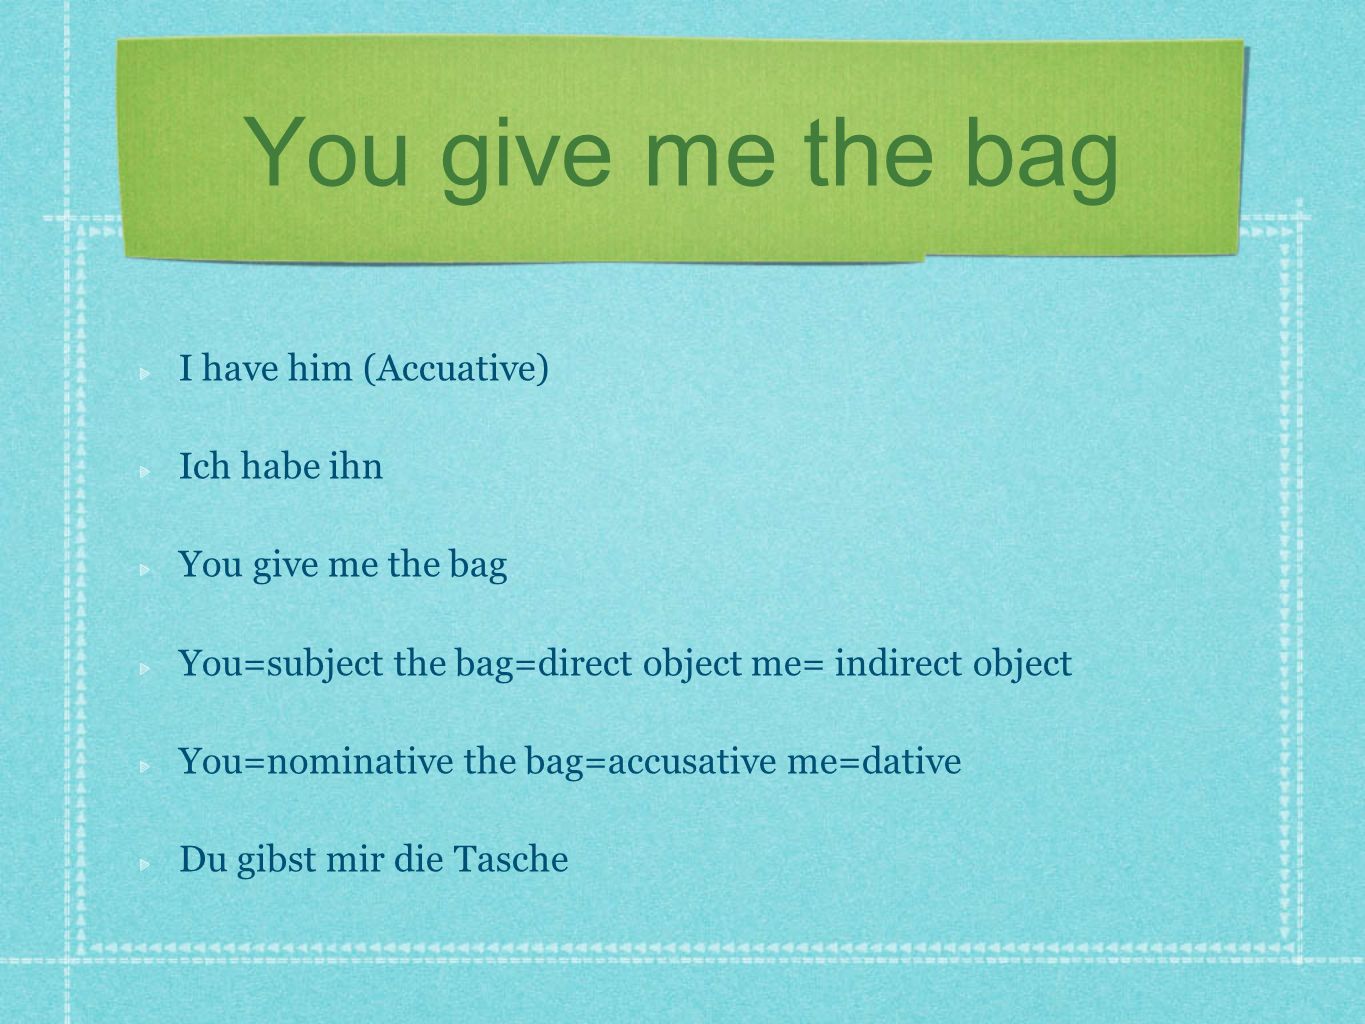 You give me the bag I have him (Accuative) Ich habe ihn